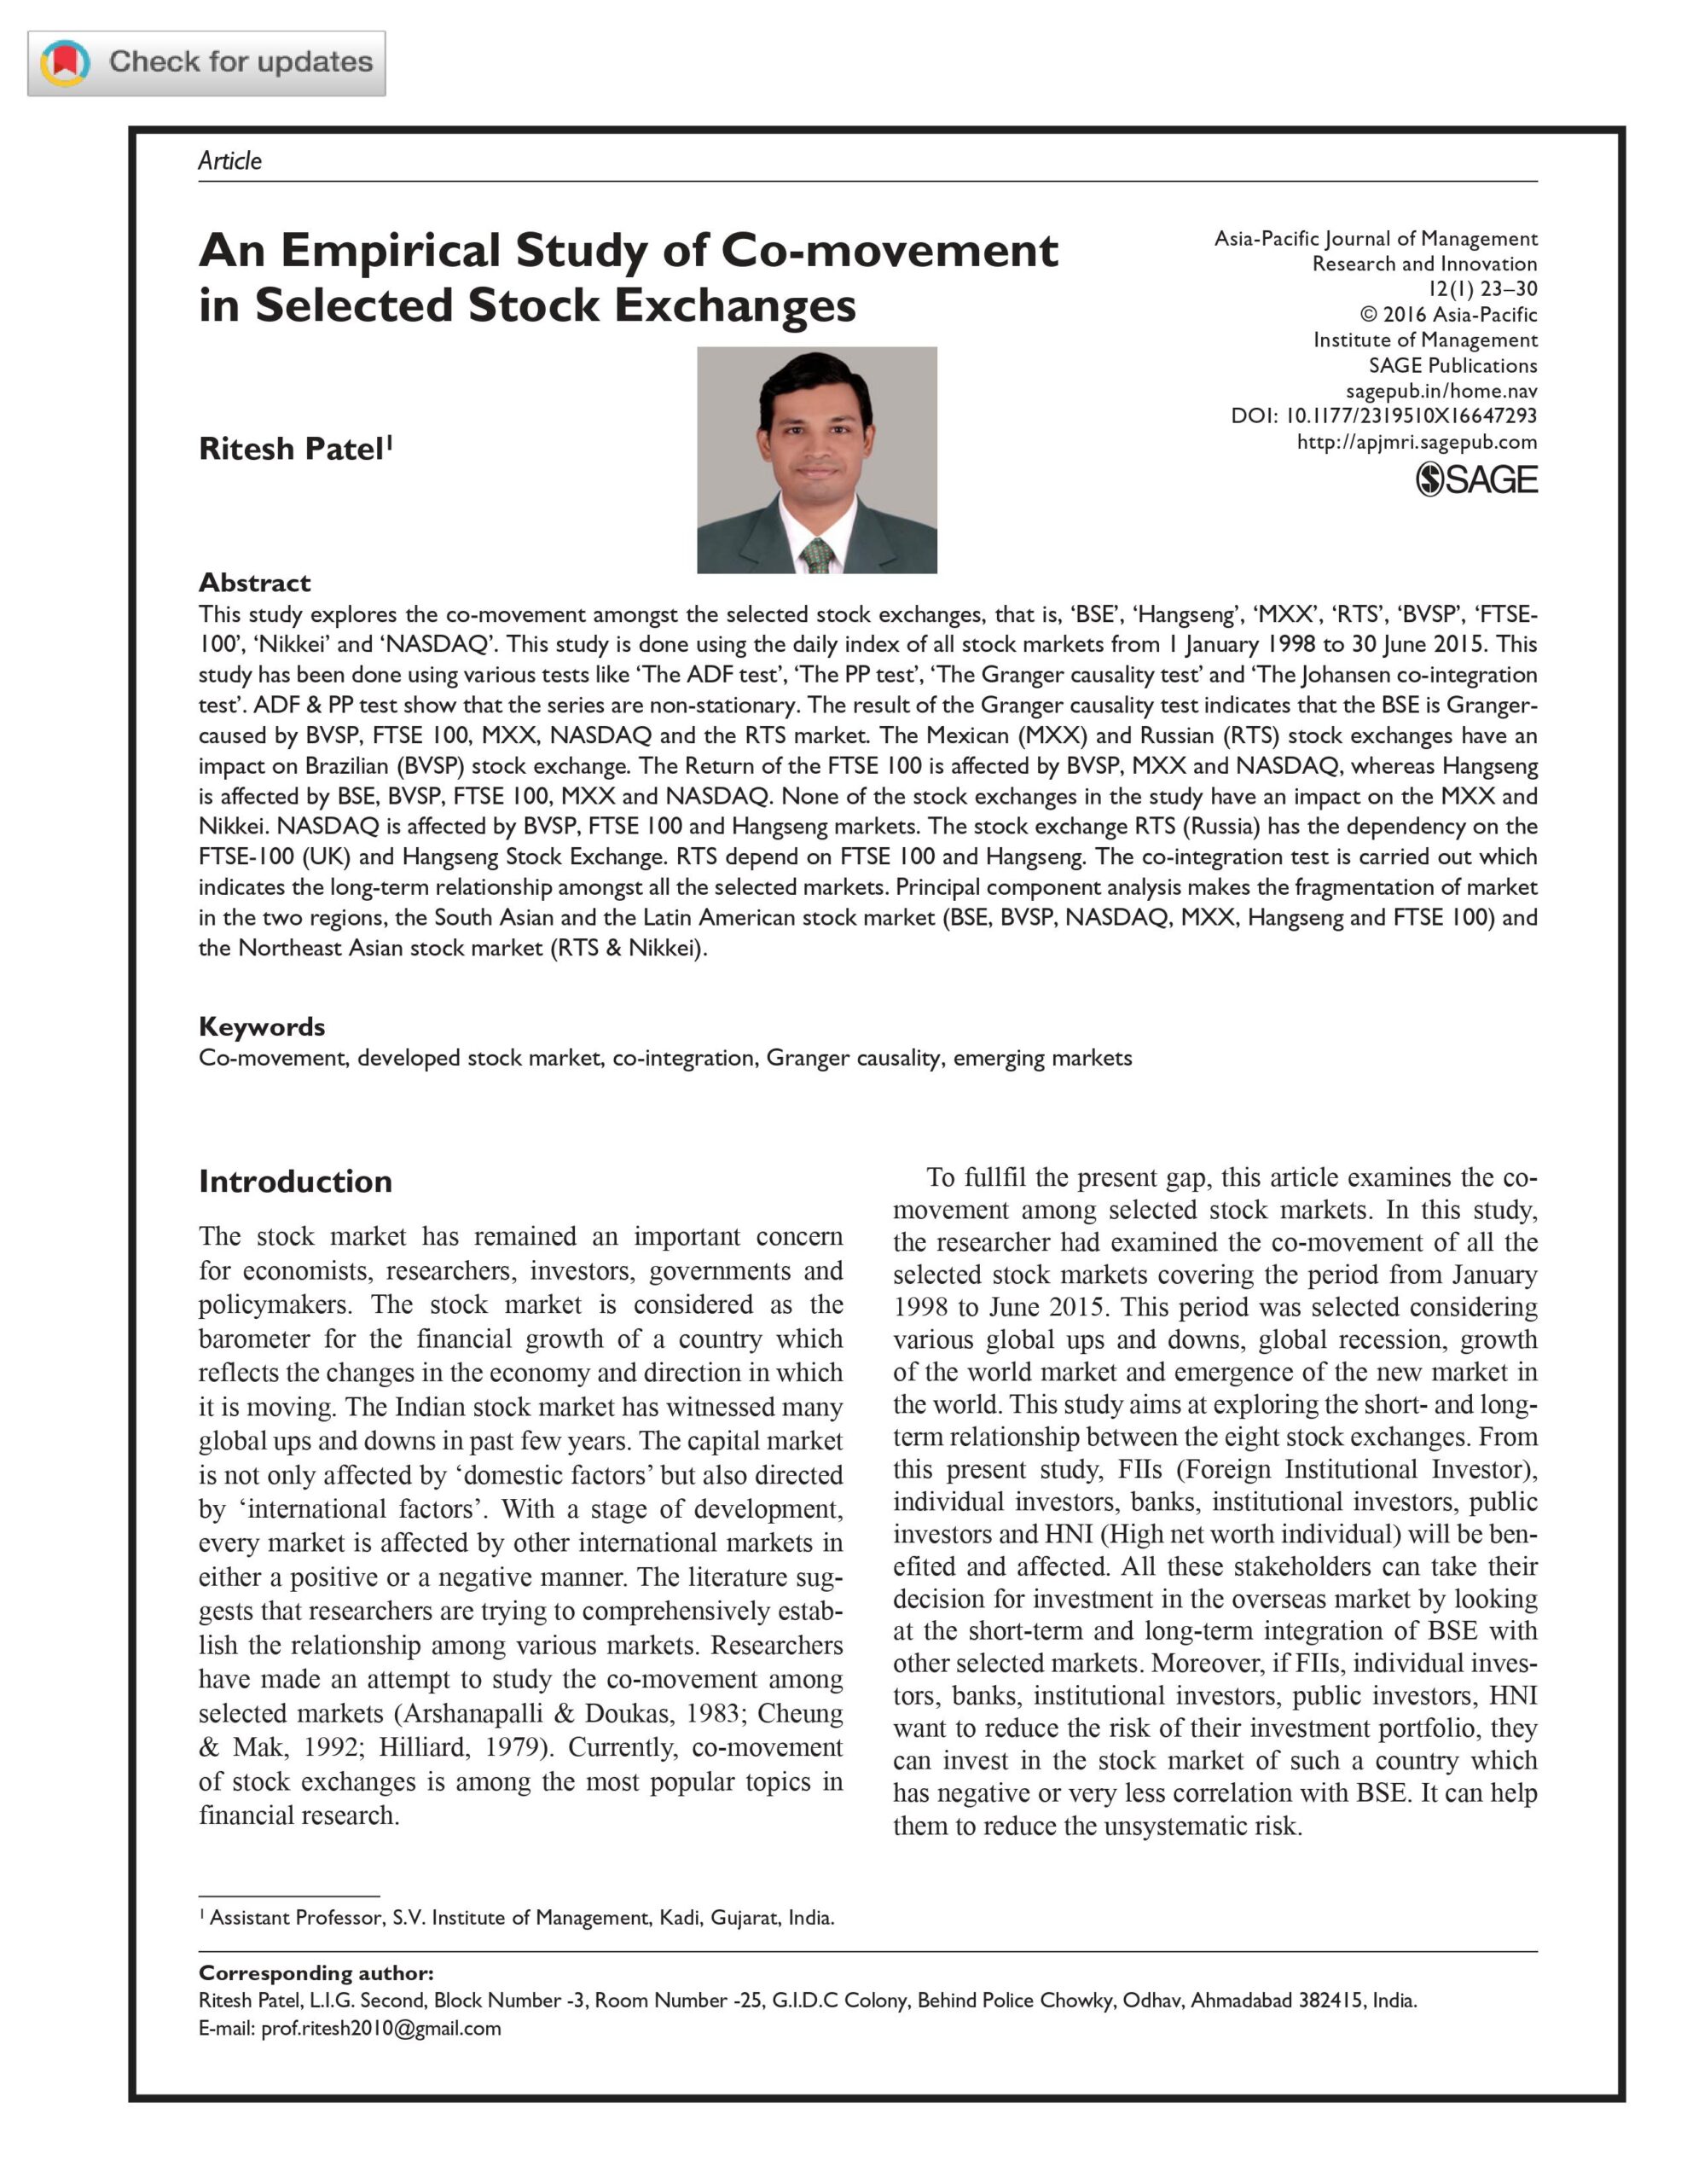 An Empirical Study of Co-movement in Selected Stock Exchanges